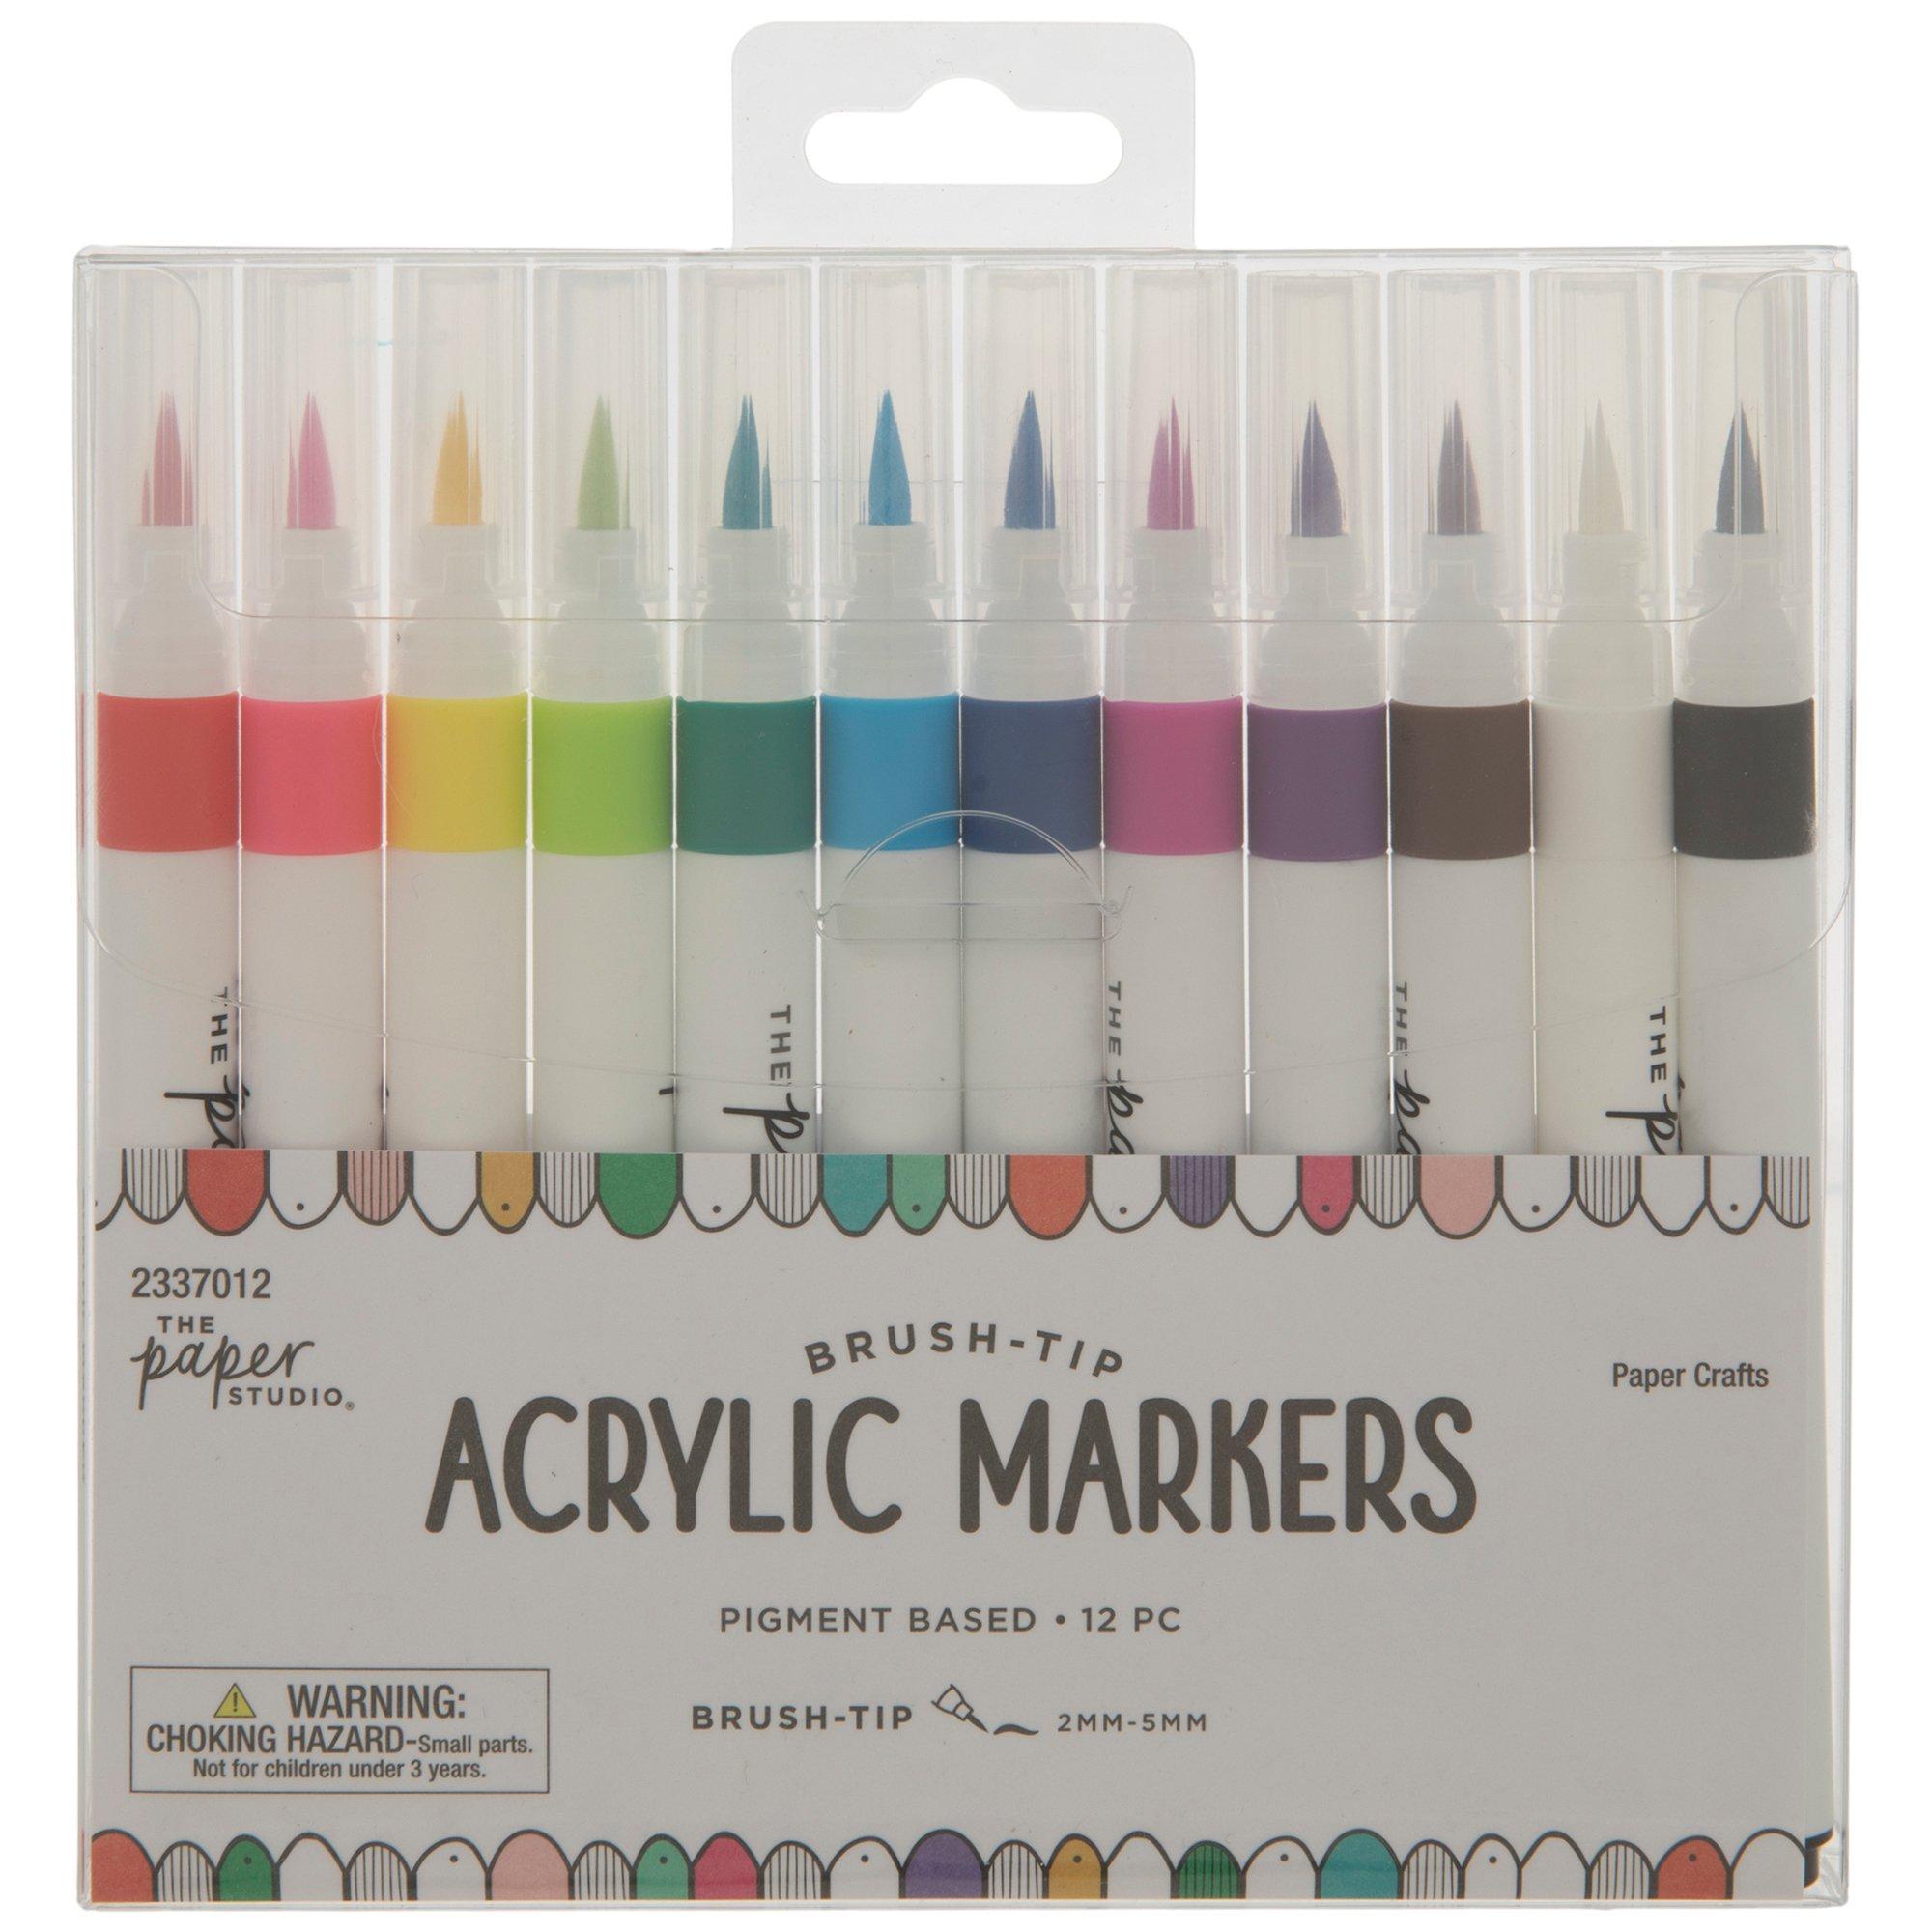 Find the latest collections at The Paper Mill Brush Tip Markers 12 Pack 951